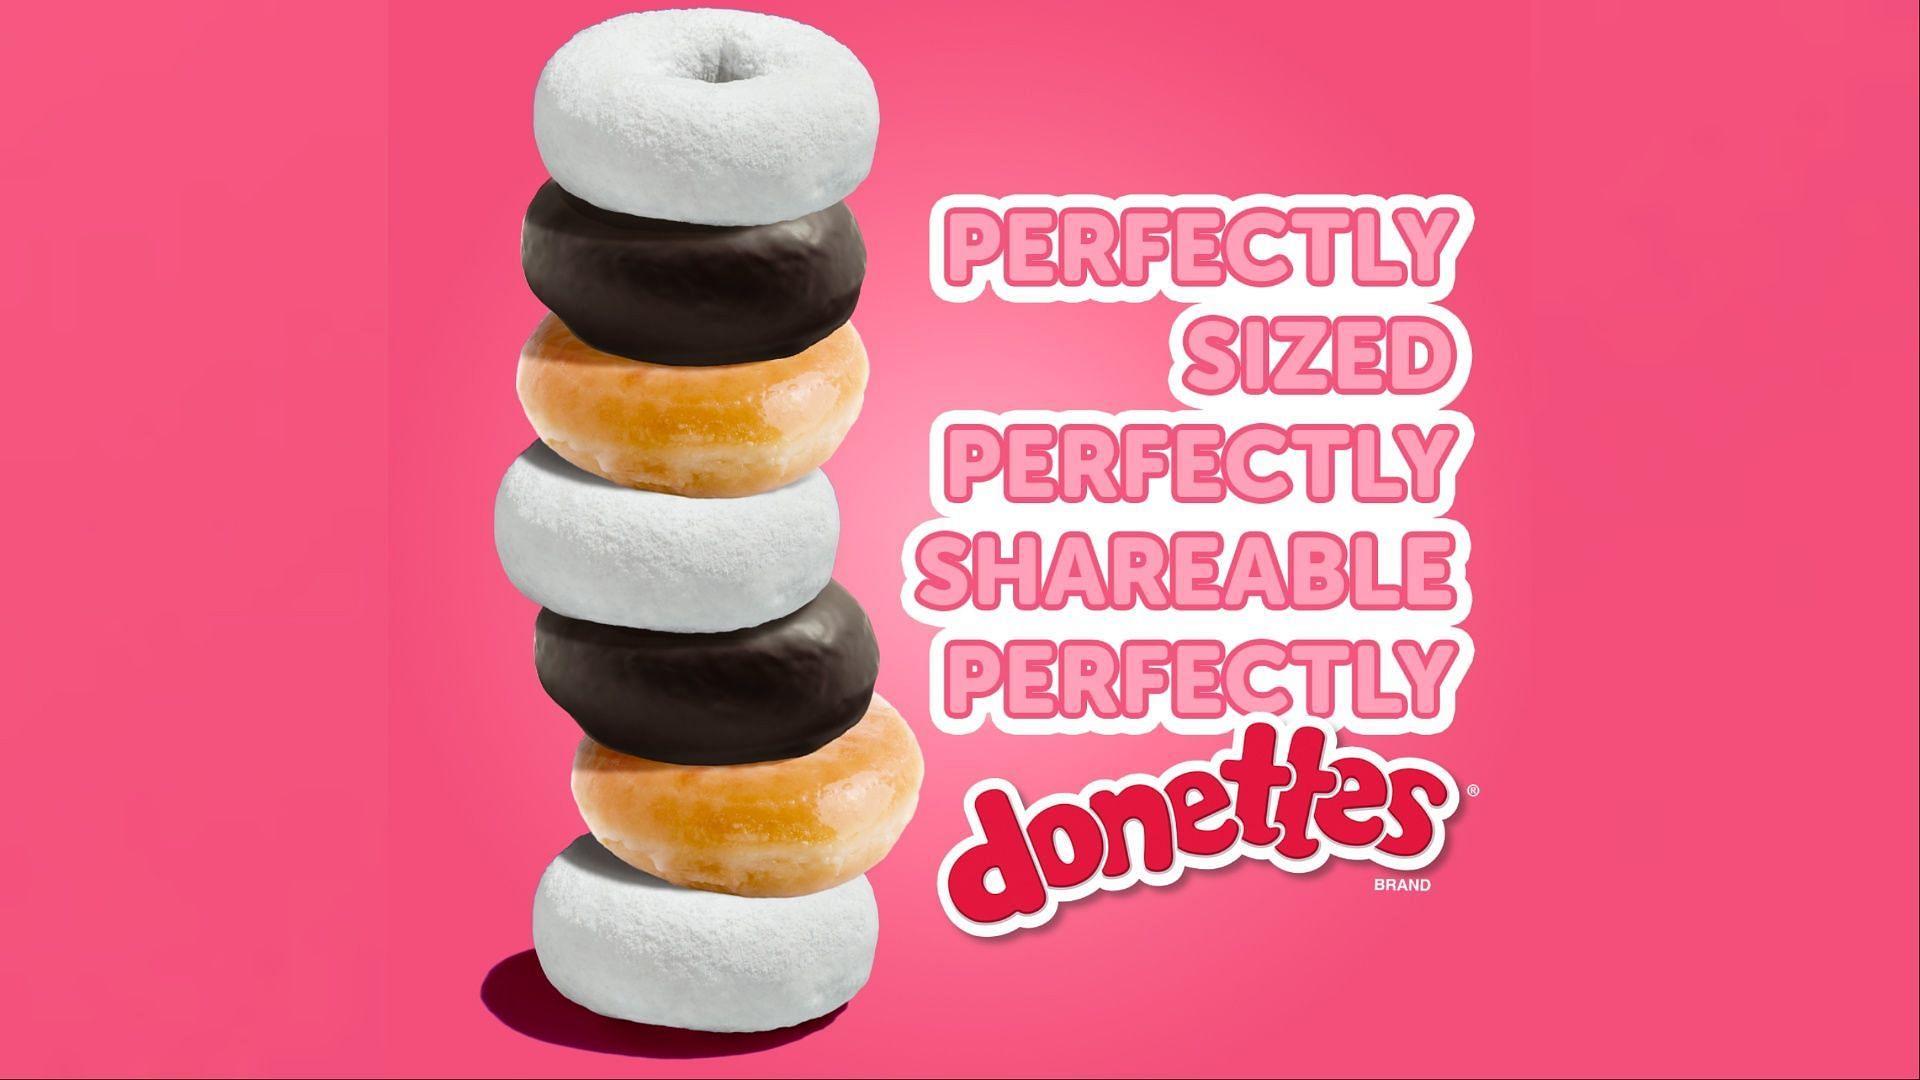 The new HoneyBun Donettes are inspired by the fluffy Donettes and smokey-warm HoneyBuns (Image via Hostess / J. M. Smucker Co.)